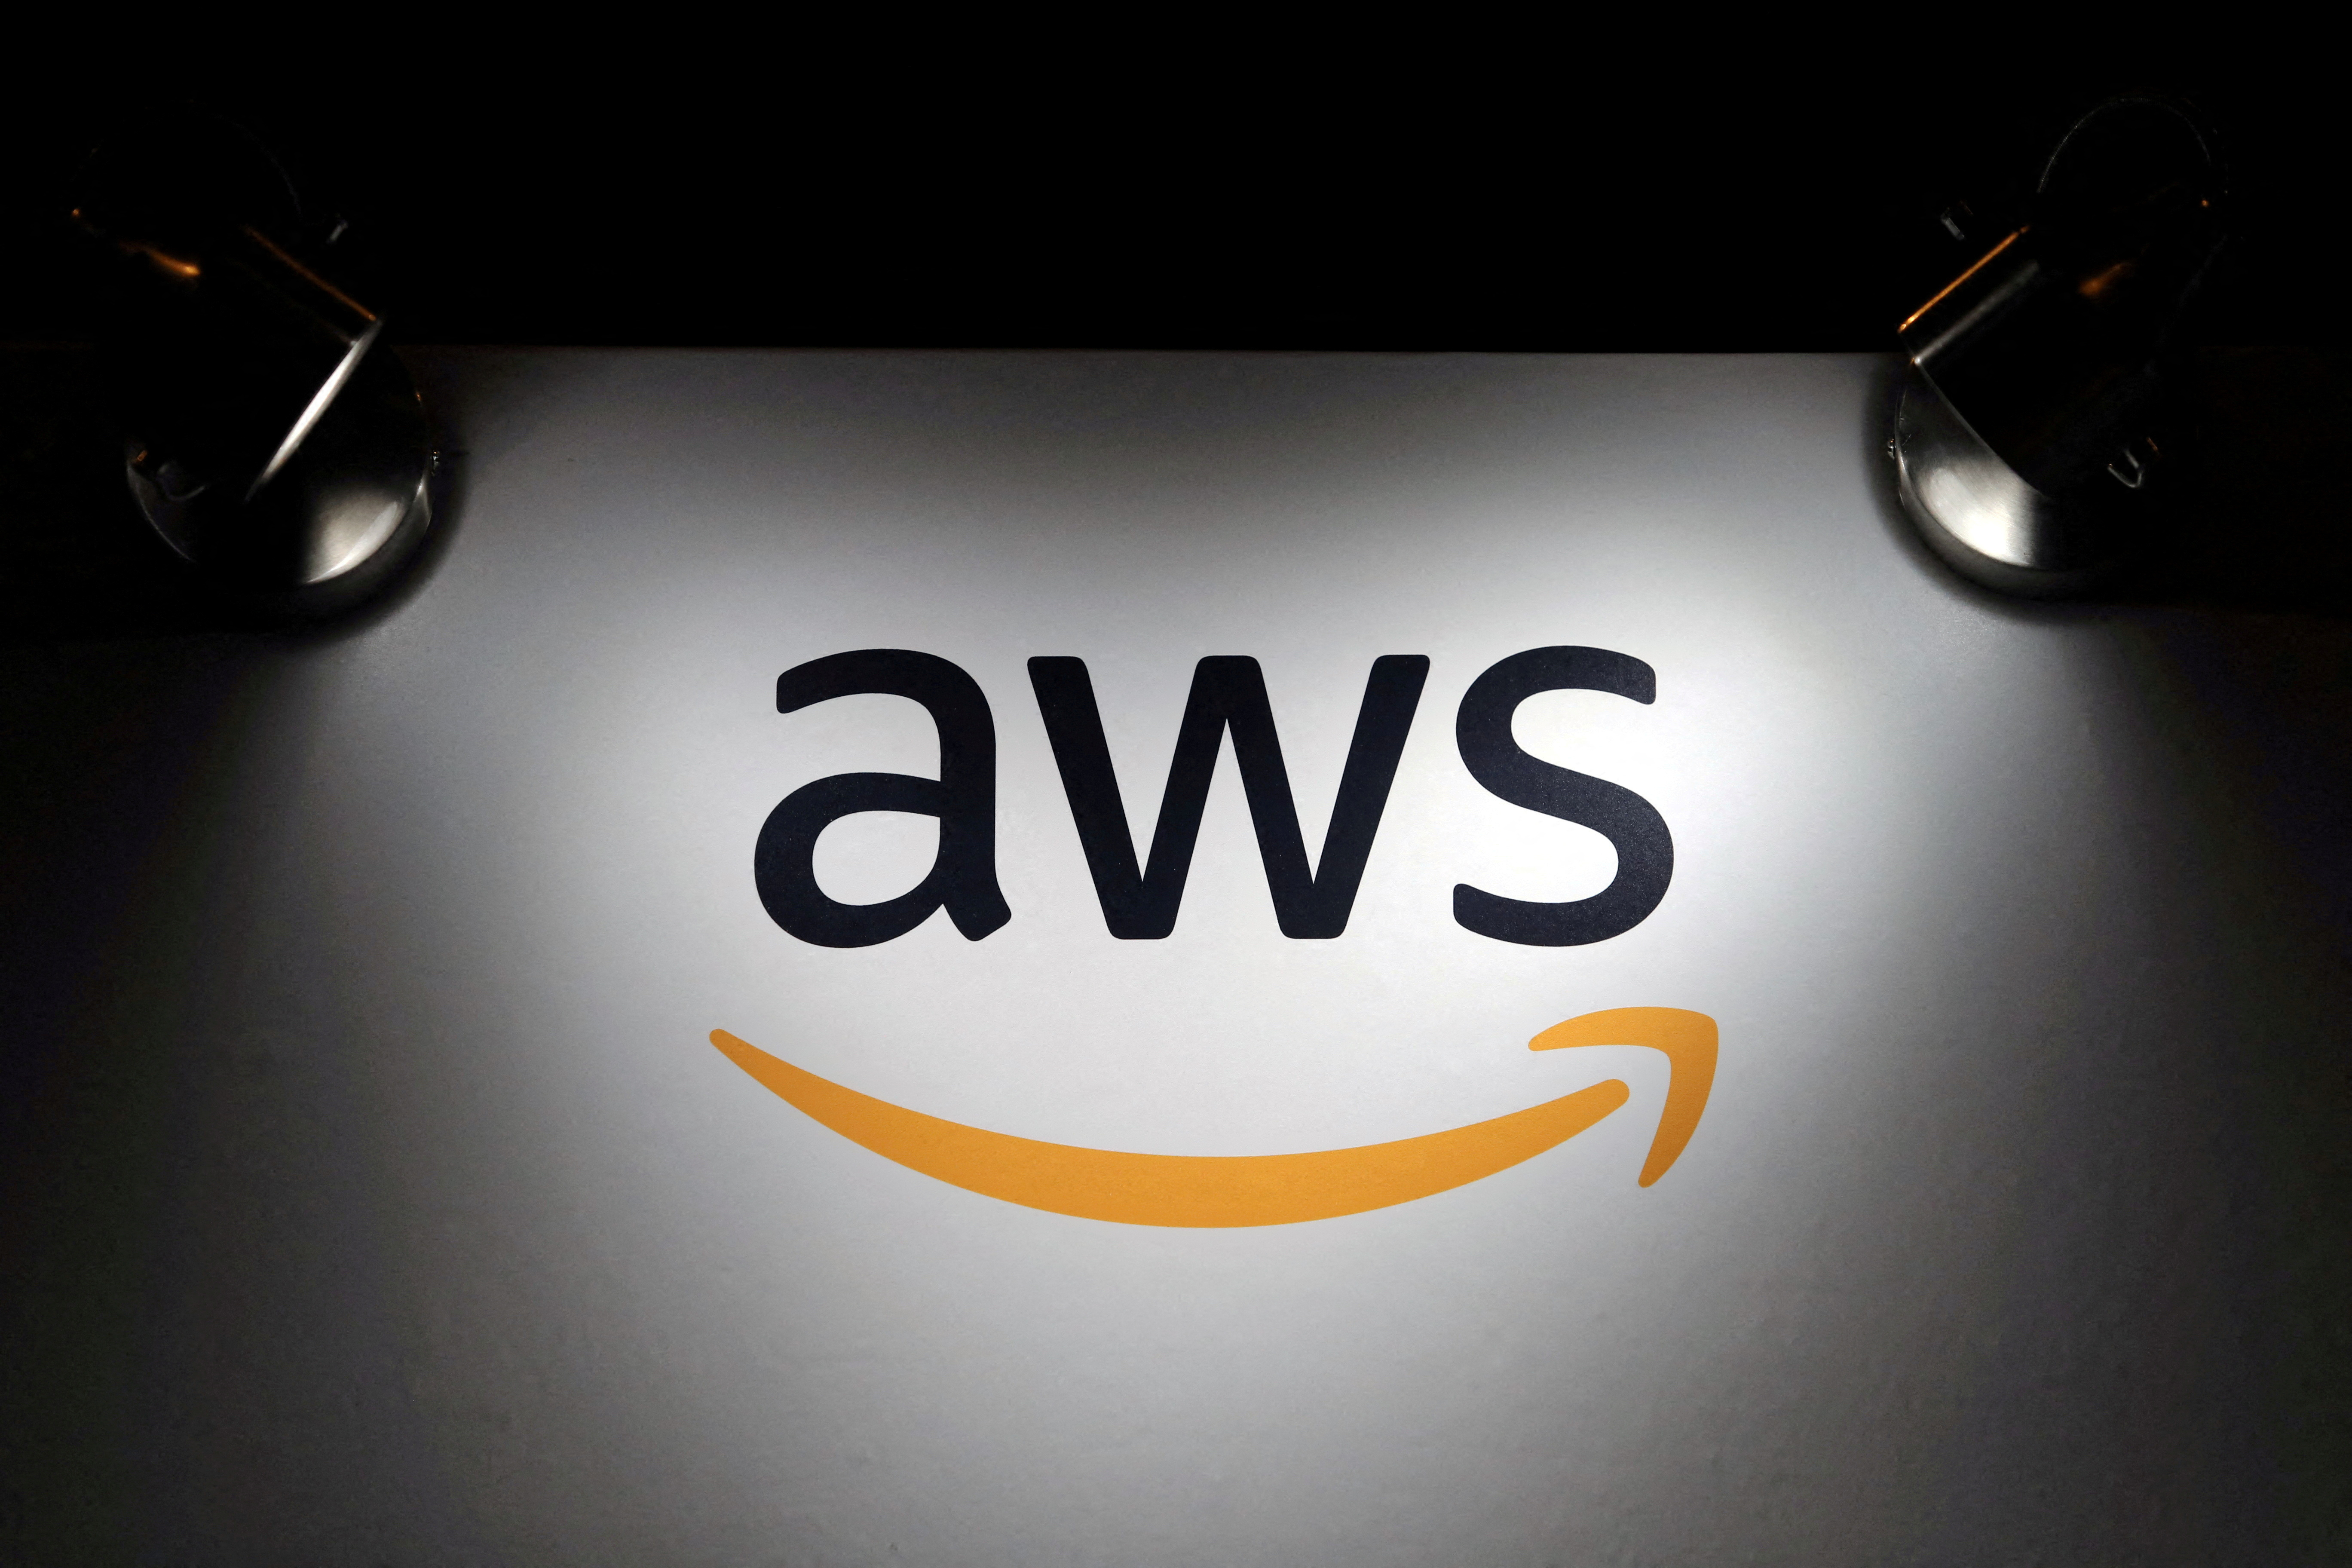 The logo of Amazon Web Services (AWS) is seen in Santiago